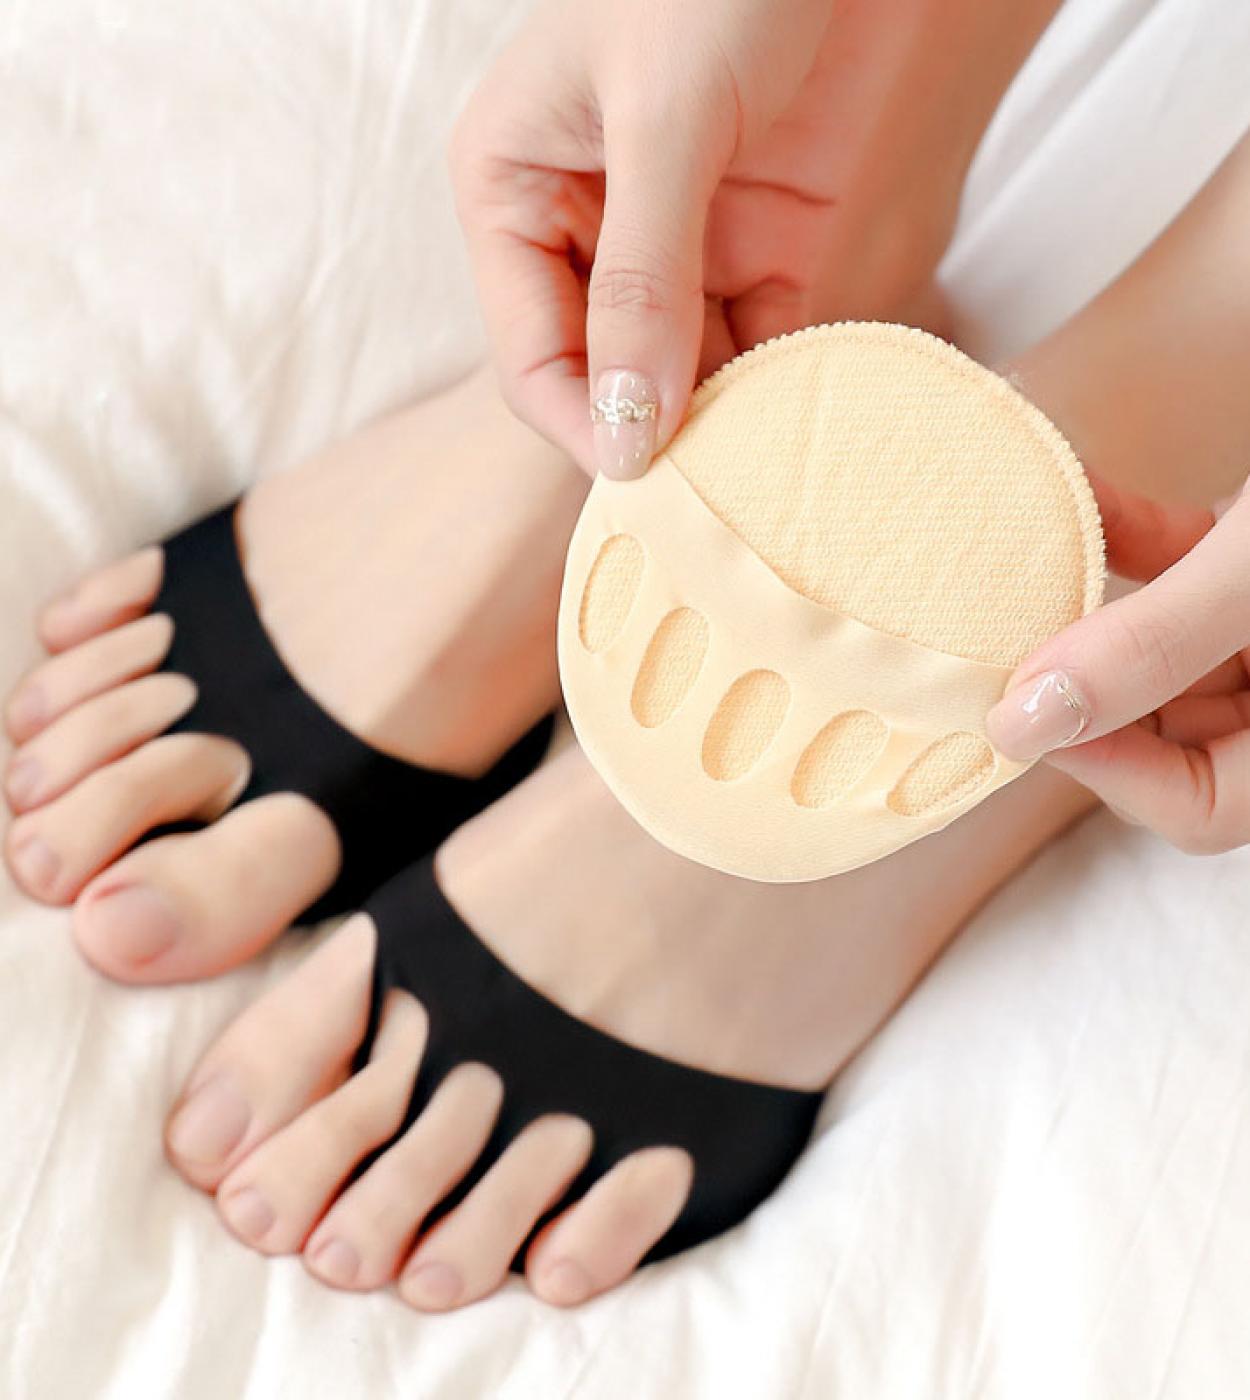 Insoles Forefoot Pad For Women High Heel Shoes Foot Blister Care Toes Insert Pad Silicone Sponge Insole Pain Relief Drop